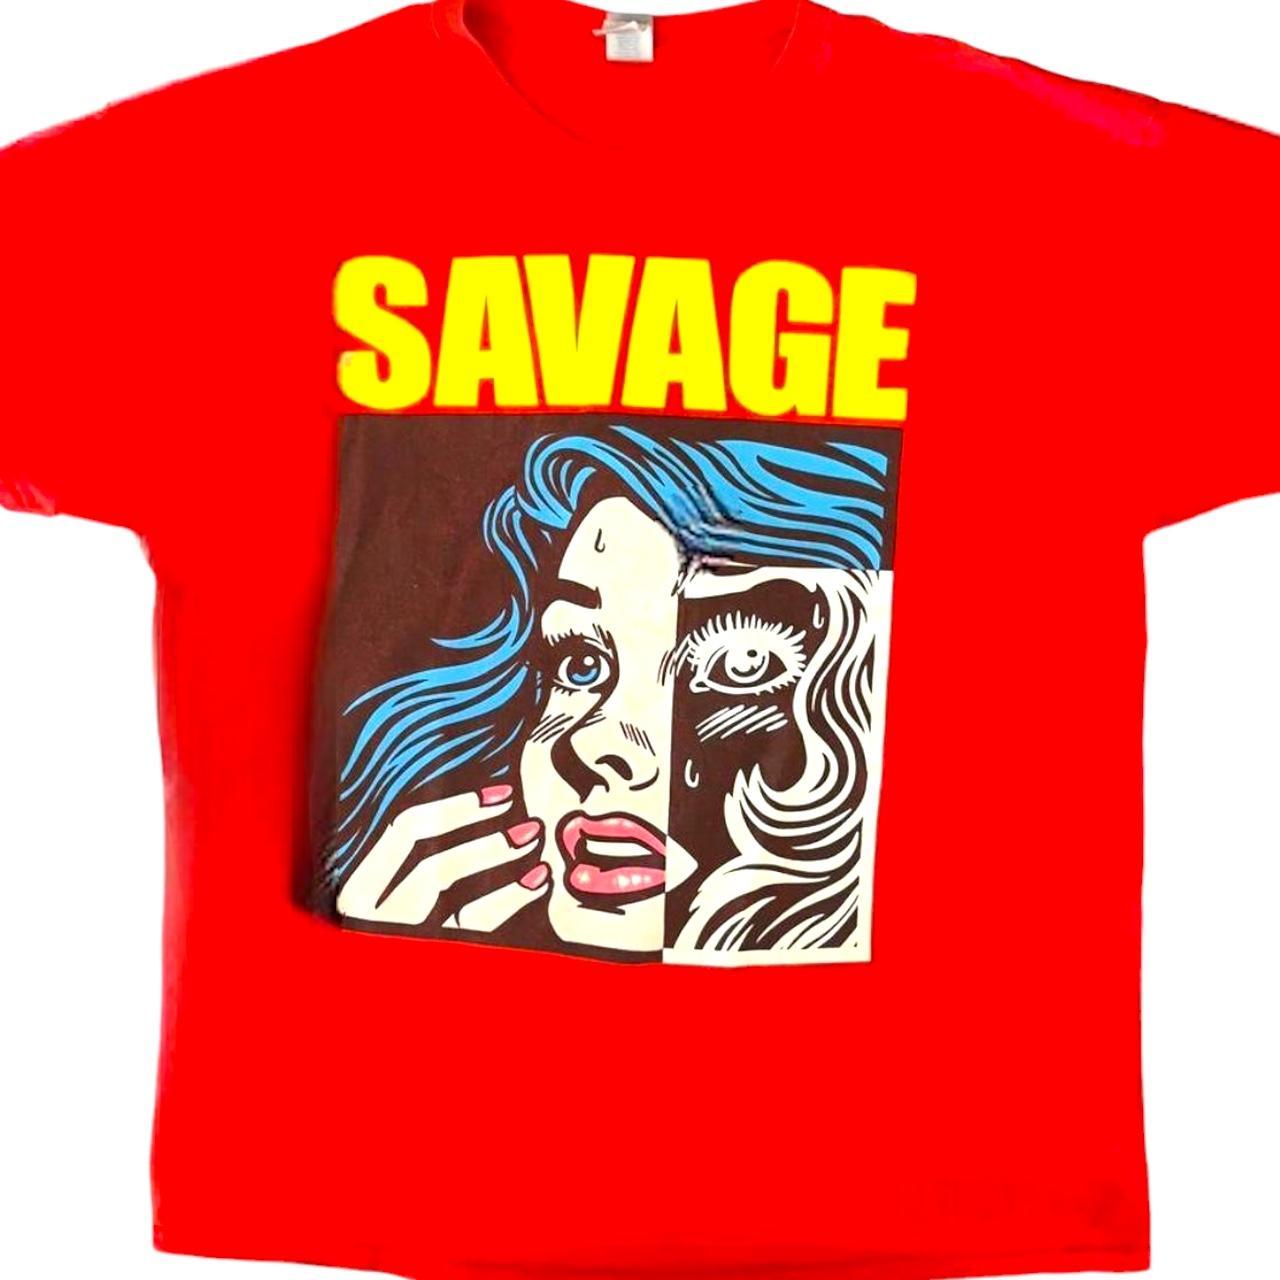 Product Image 2 - Savage Big Spellout With Artistic